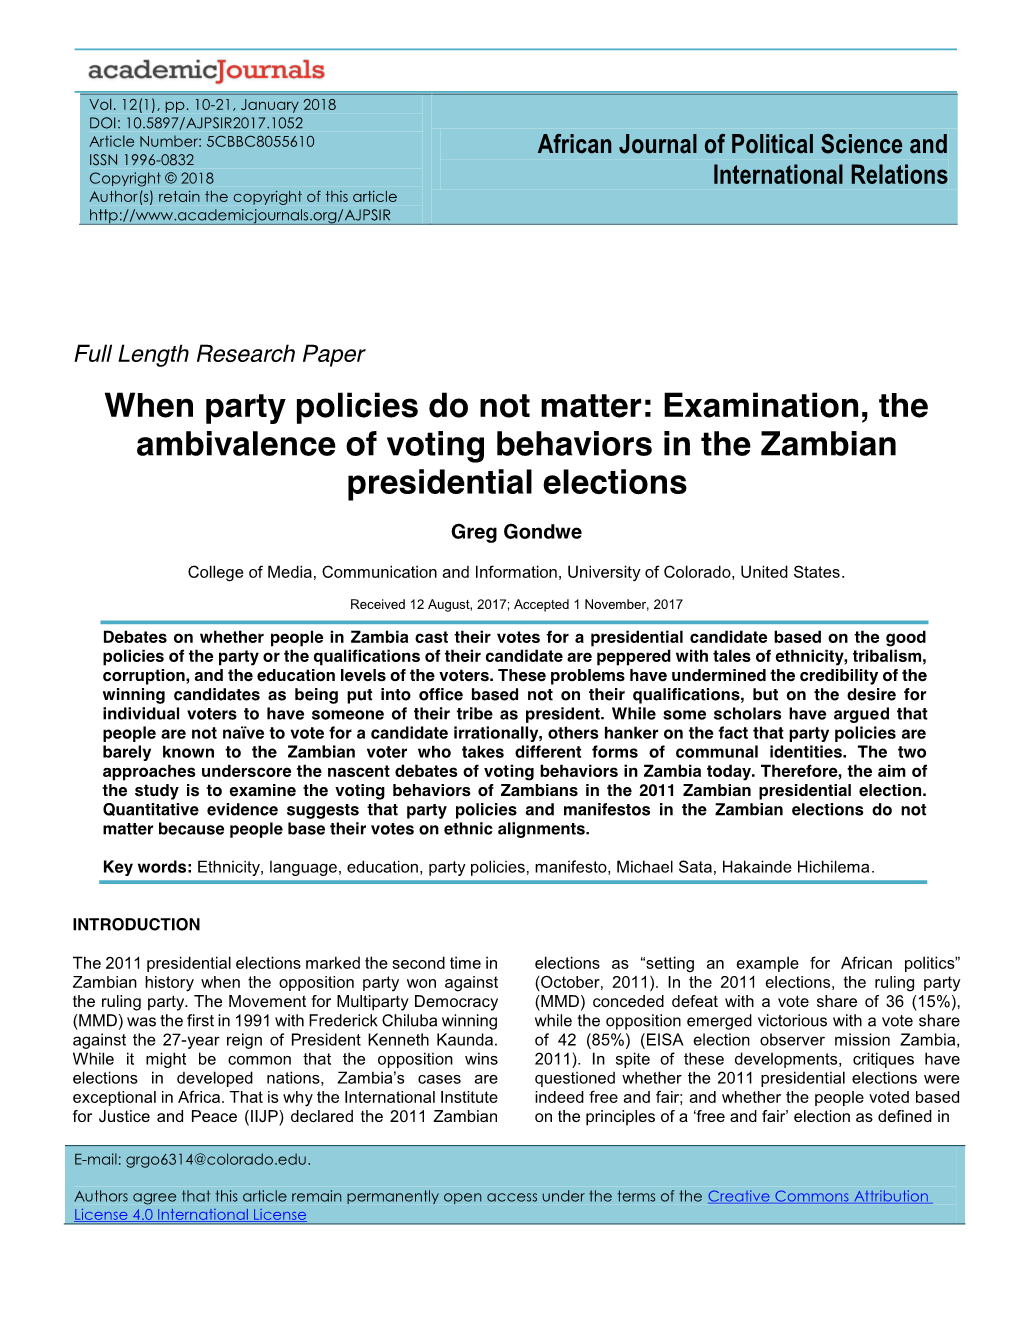 When Party Policies Do Not Matter: Examination, the Ambivalence of Voting Behaviors in the Zambian Presidential Elections